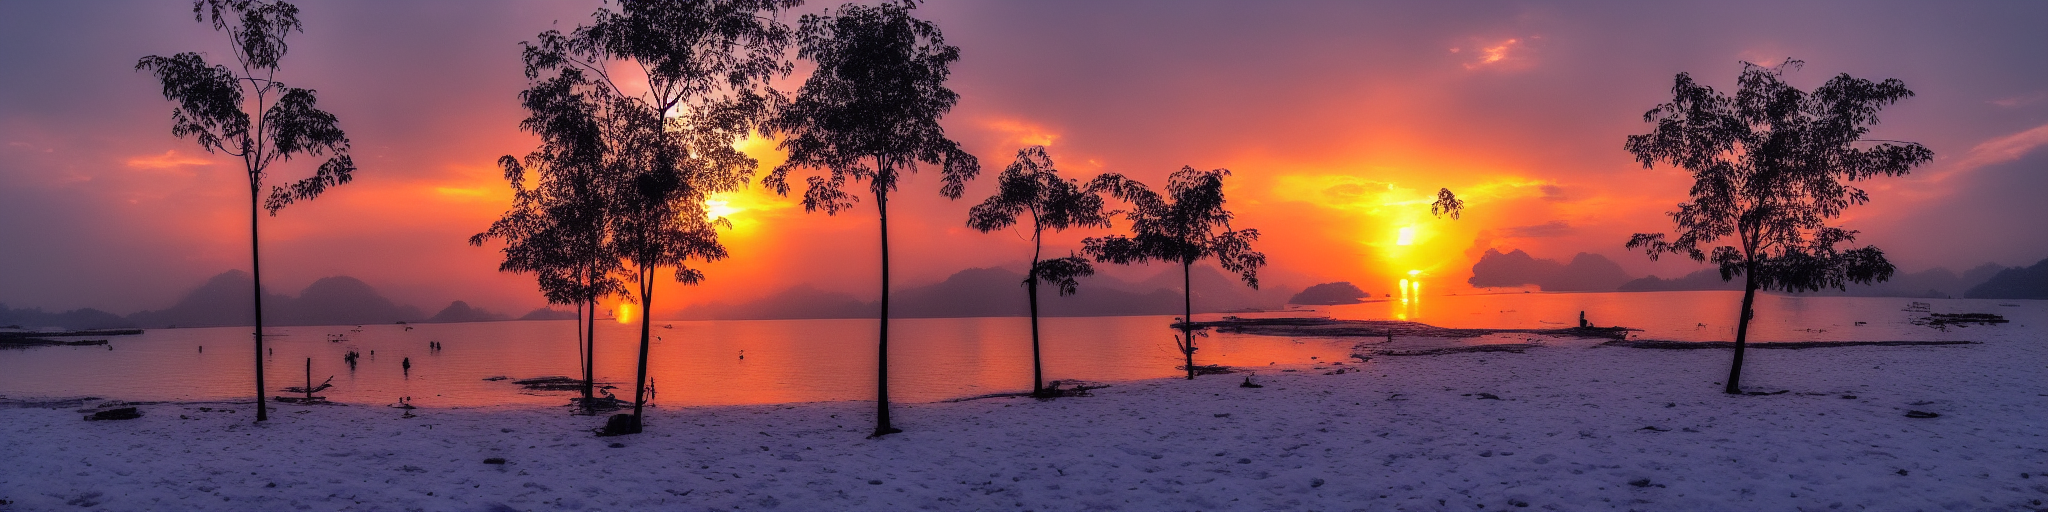 a beautiful sunset in malaysia while snowing 